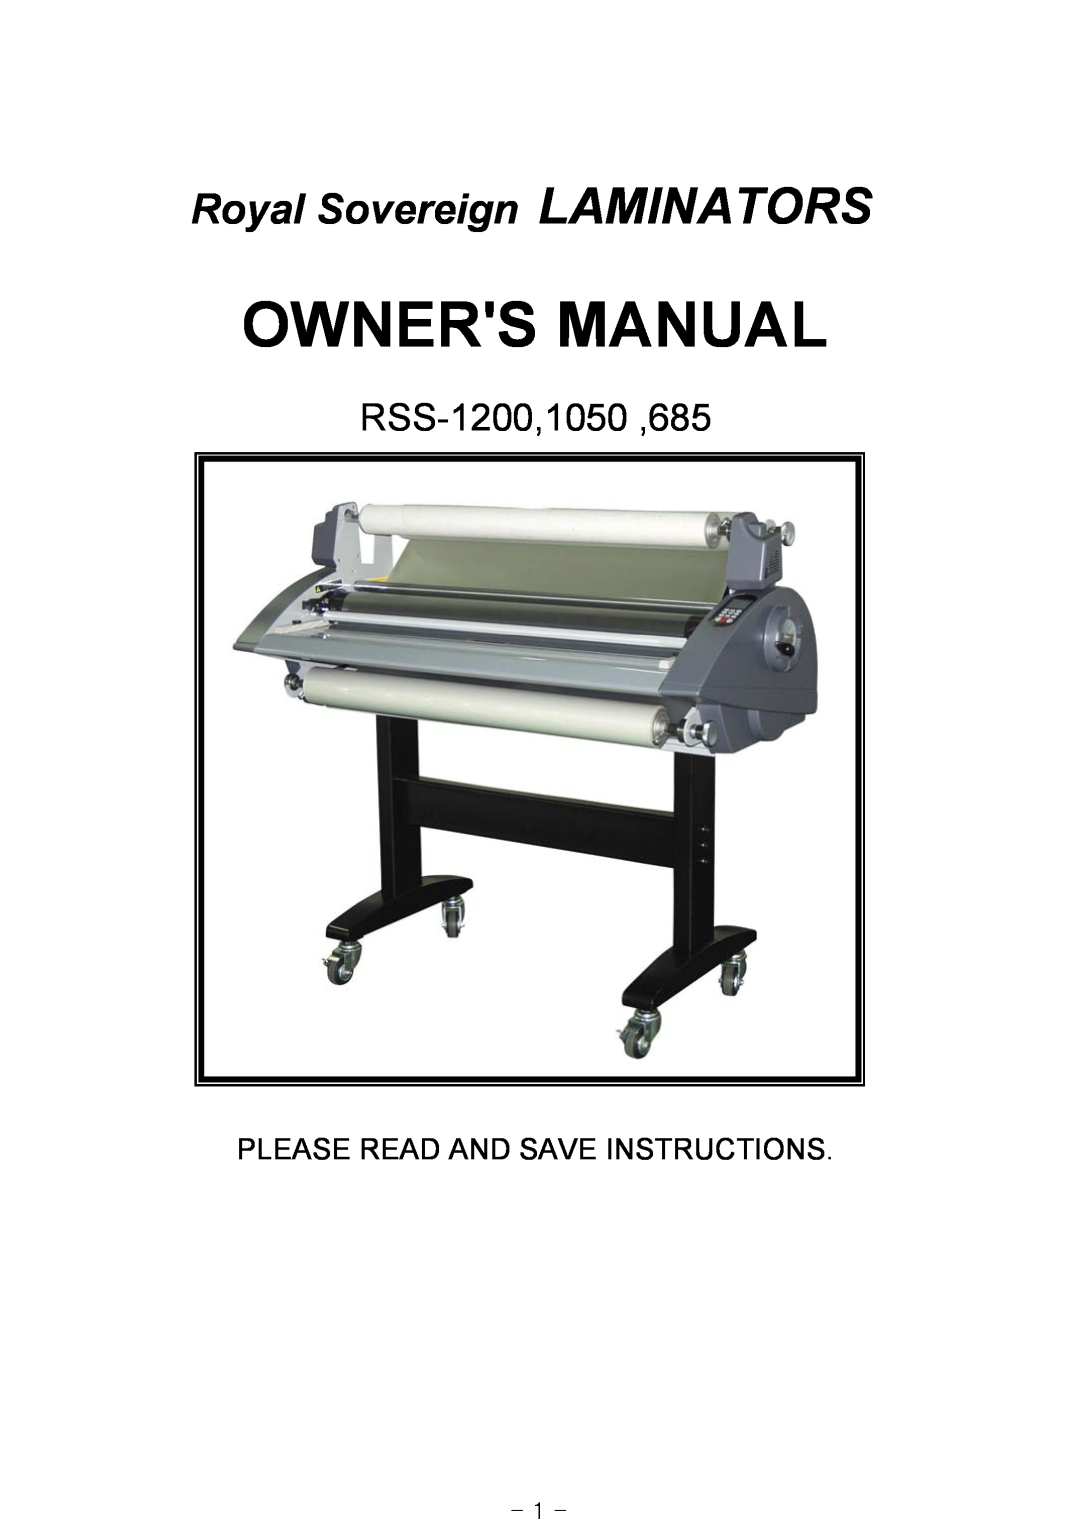 Royal Sovereign RSS-1050, RSS-685 owner manual RSS-1200,1050 ,685, Owners Manual, Royal Sovereign LAMINATORS 